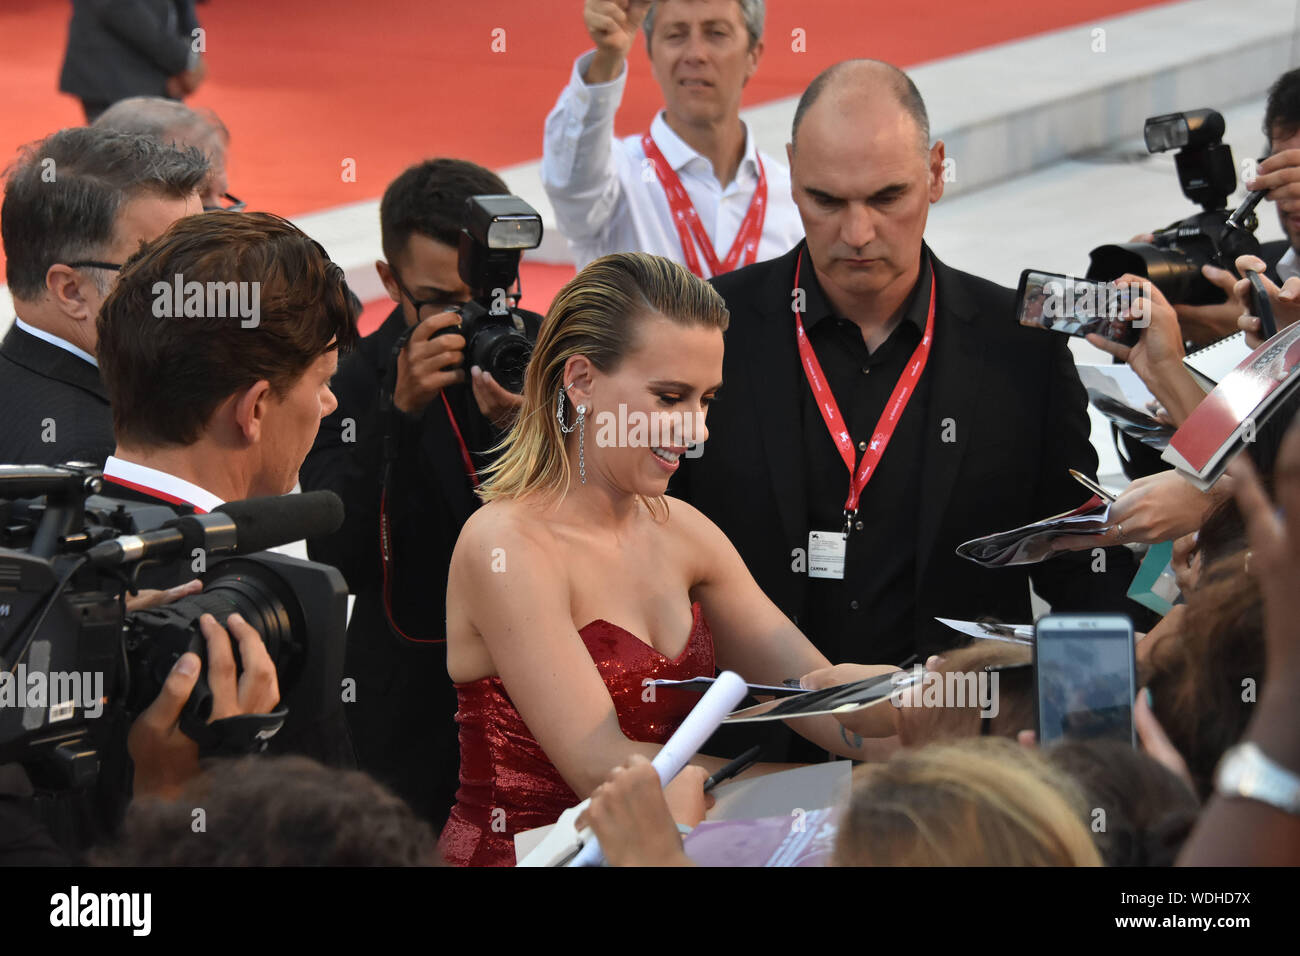 VENICE, Italy. 29th Aug, 2019. Scarlett Johansson walks the red carpet ahead of the 'Marriage Story' screening during the 76th Venice Film Festival at Sala Grande on August 29, 2019 in Venice, Italy. Credit: Andrea Merola/Awakening/Alamy Live News Stock Photo